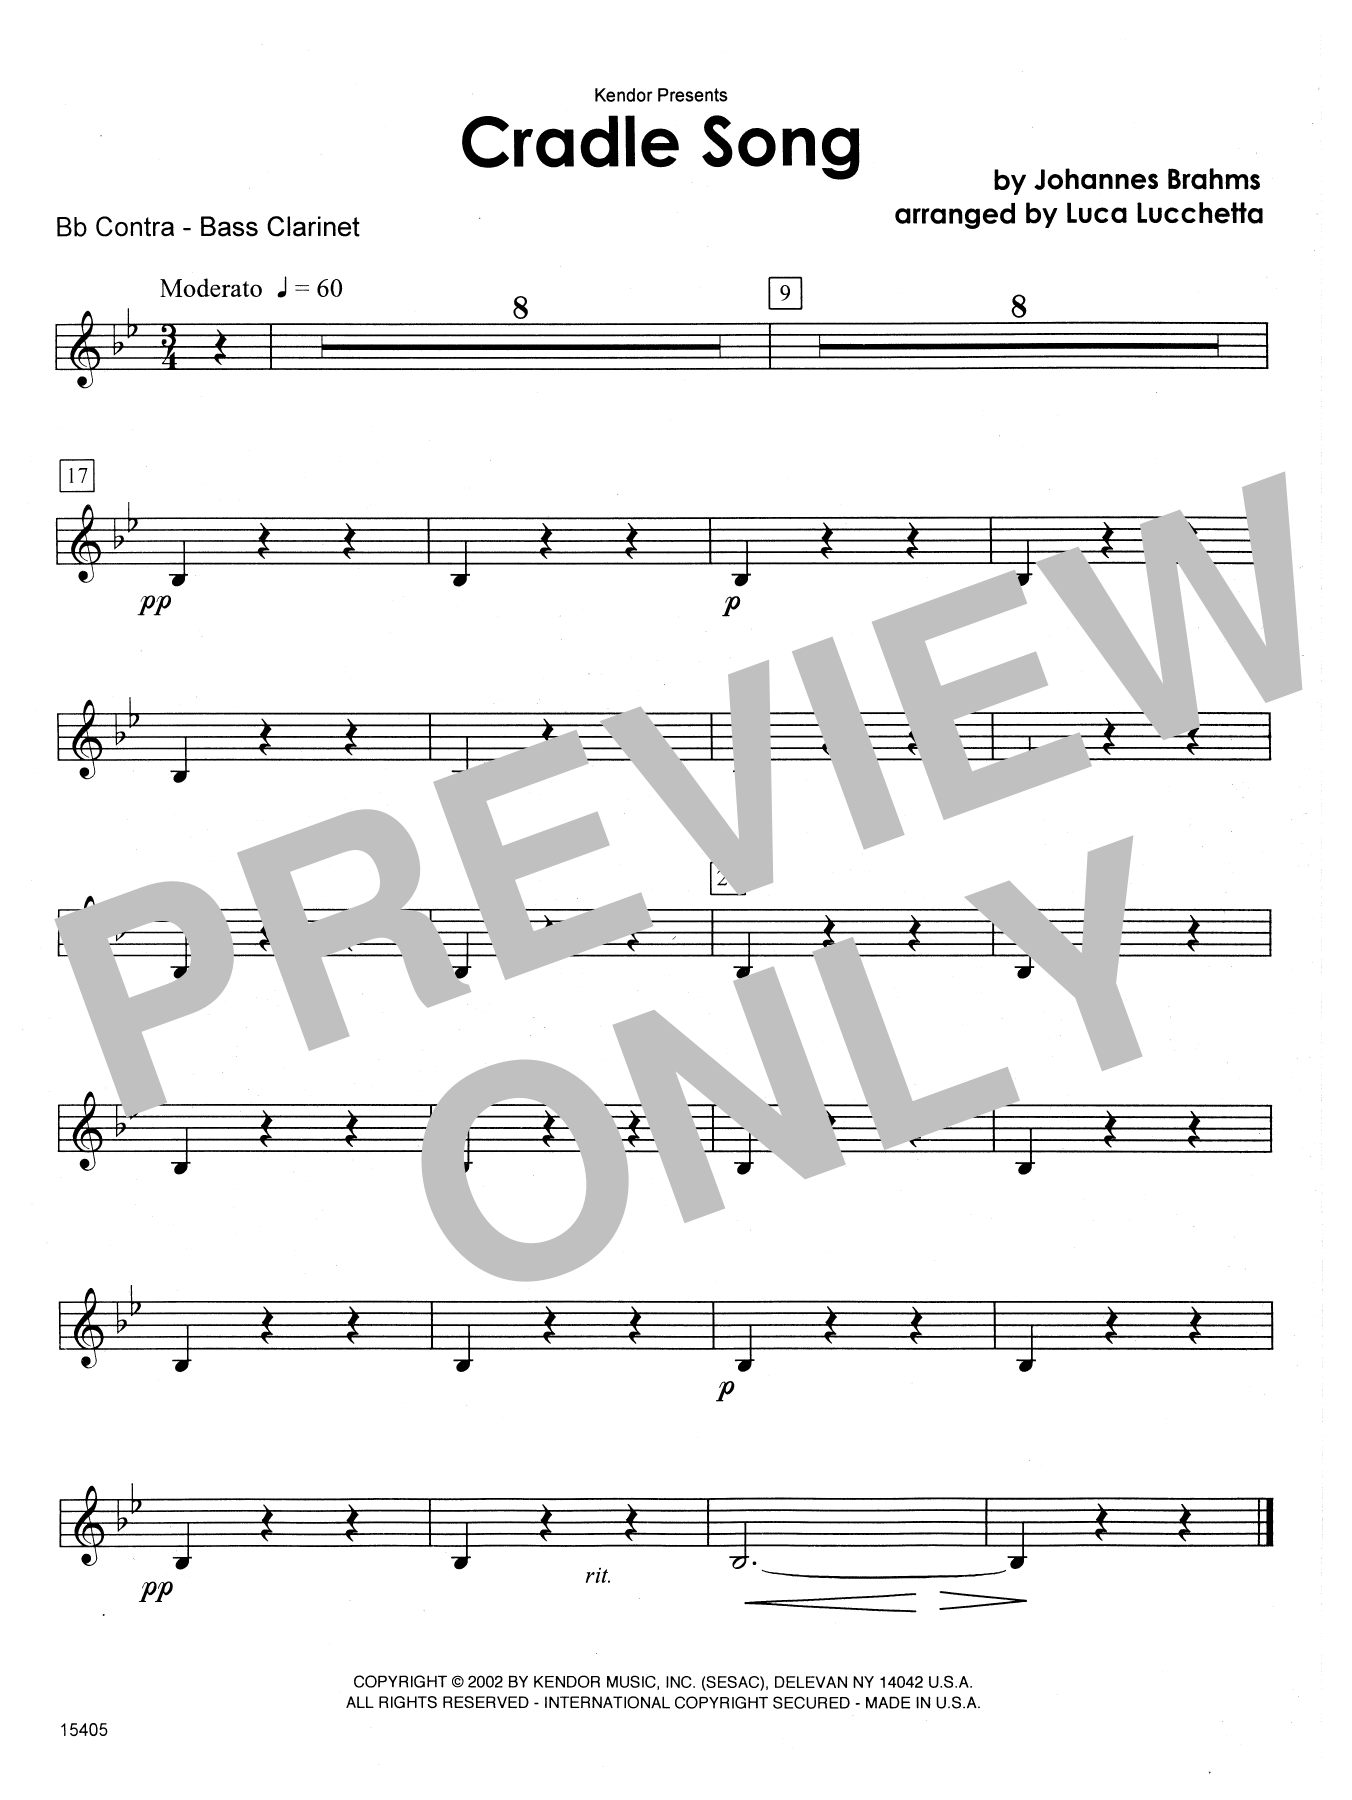 Lucchetta Cradle Song - Bb Contra Bass Clarinet sheet music notes and chords. Download Printable PDF.